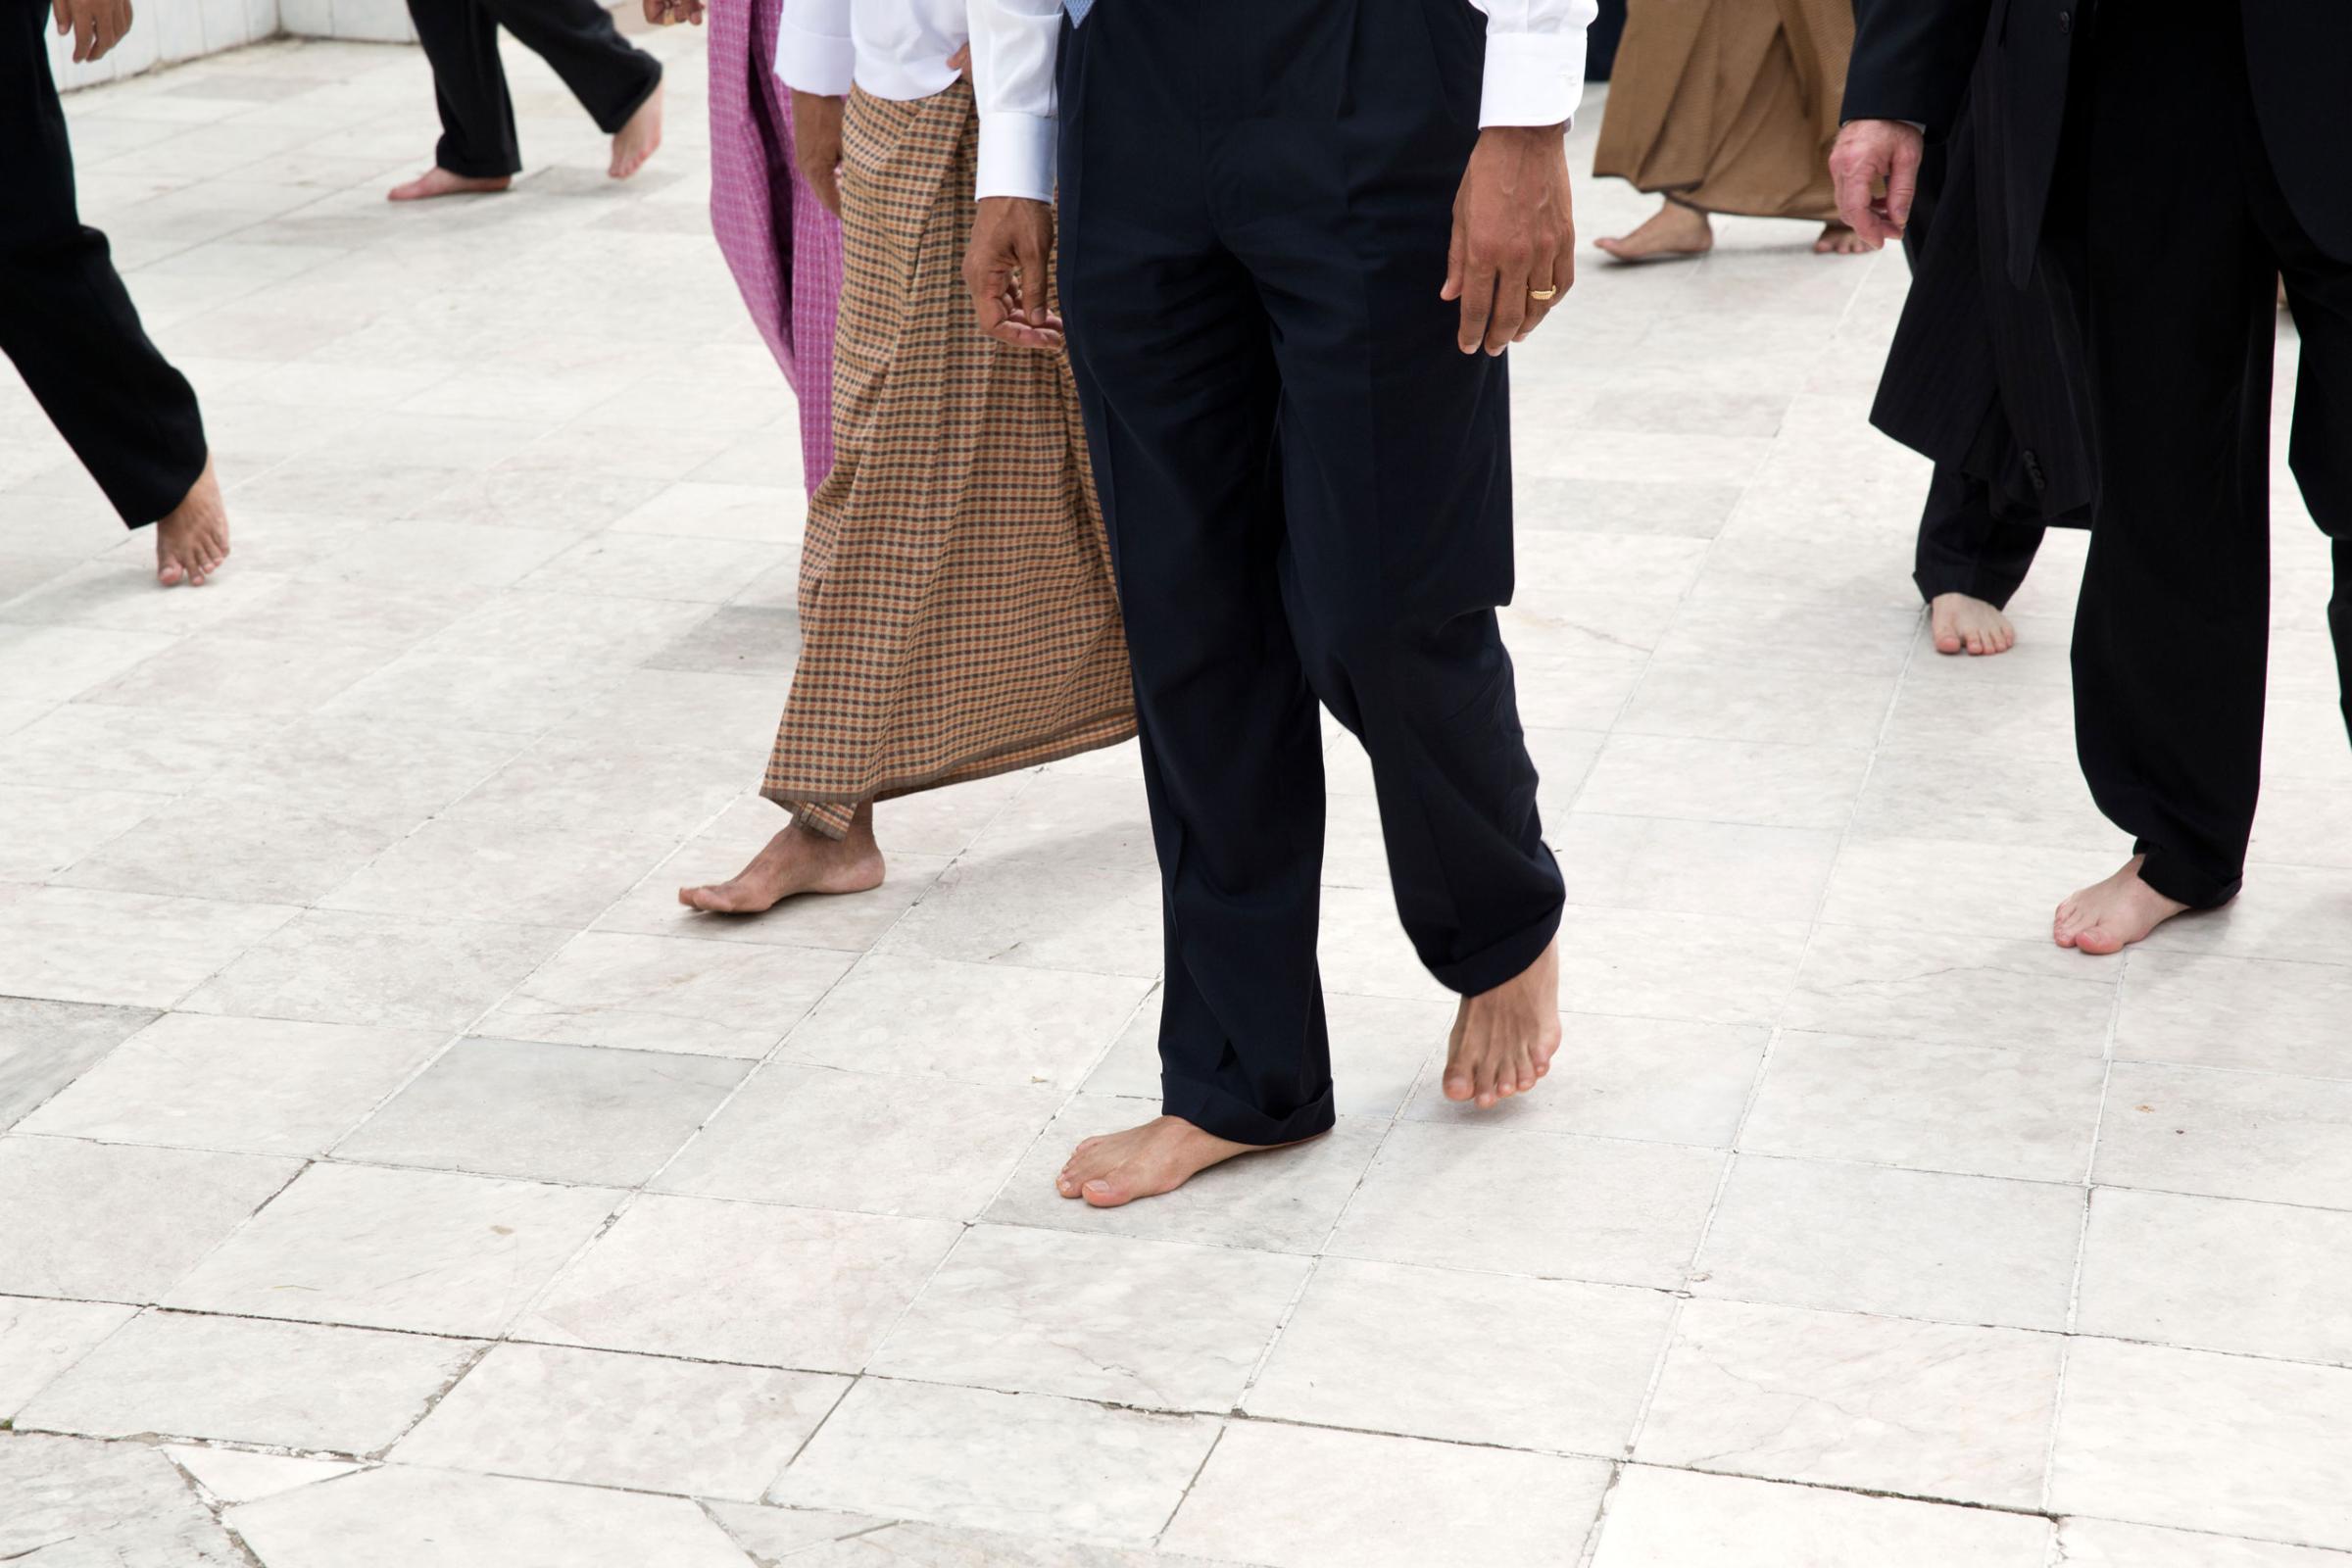 President Barack Obama, guides, and Secret Service agents walk barefoot during a tour of the Shwedagon Pagoda in Rangoon, Burma, Nov. 19, 2012.